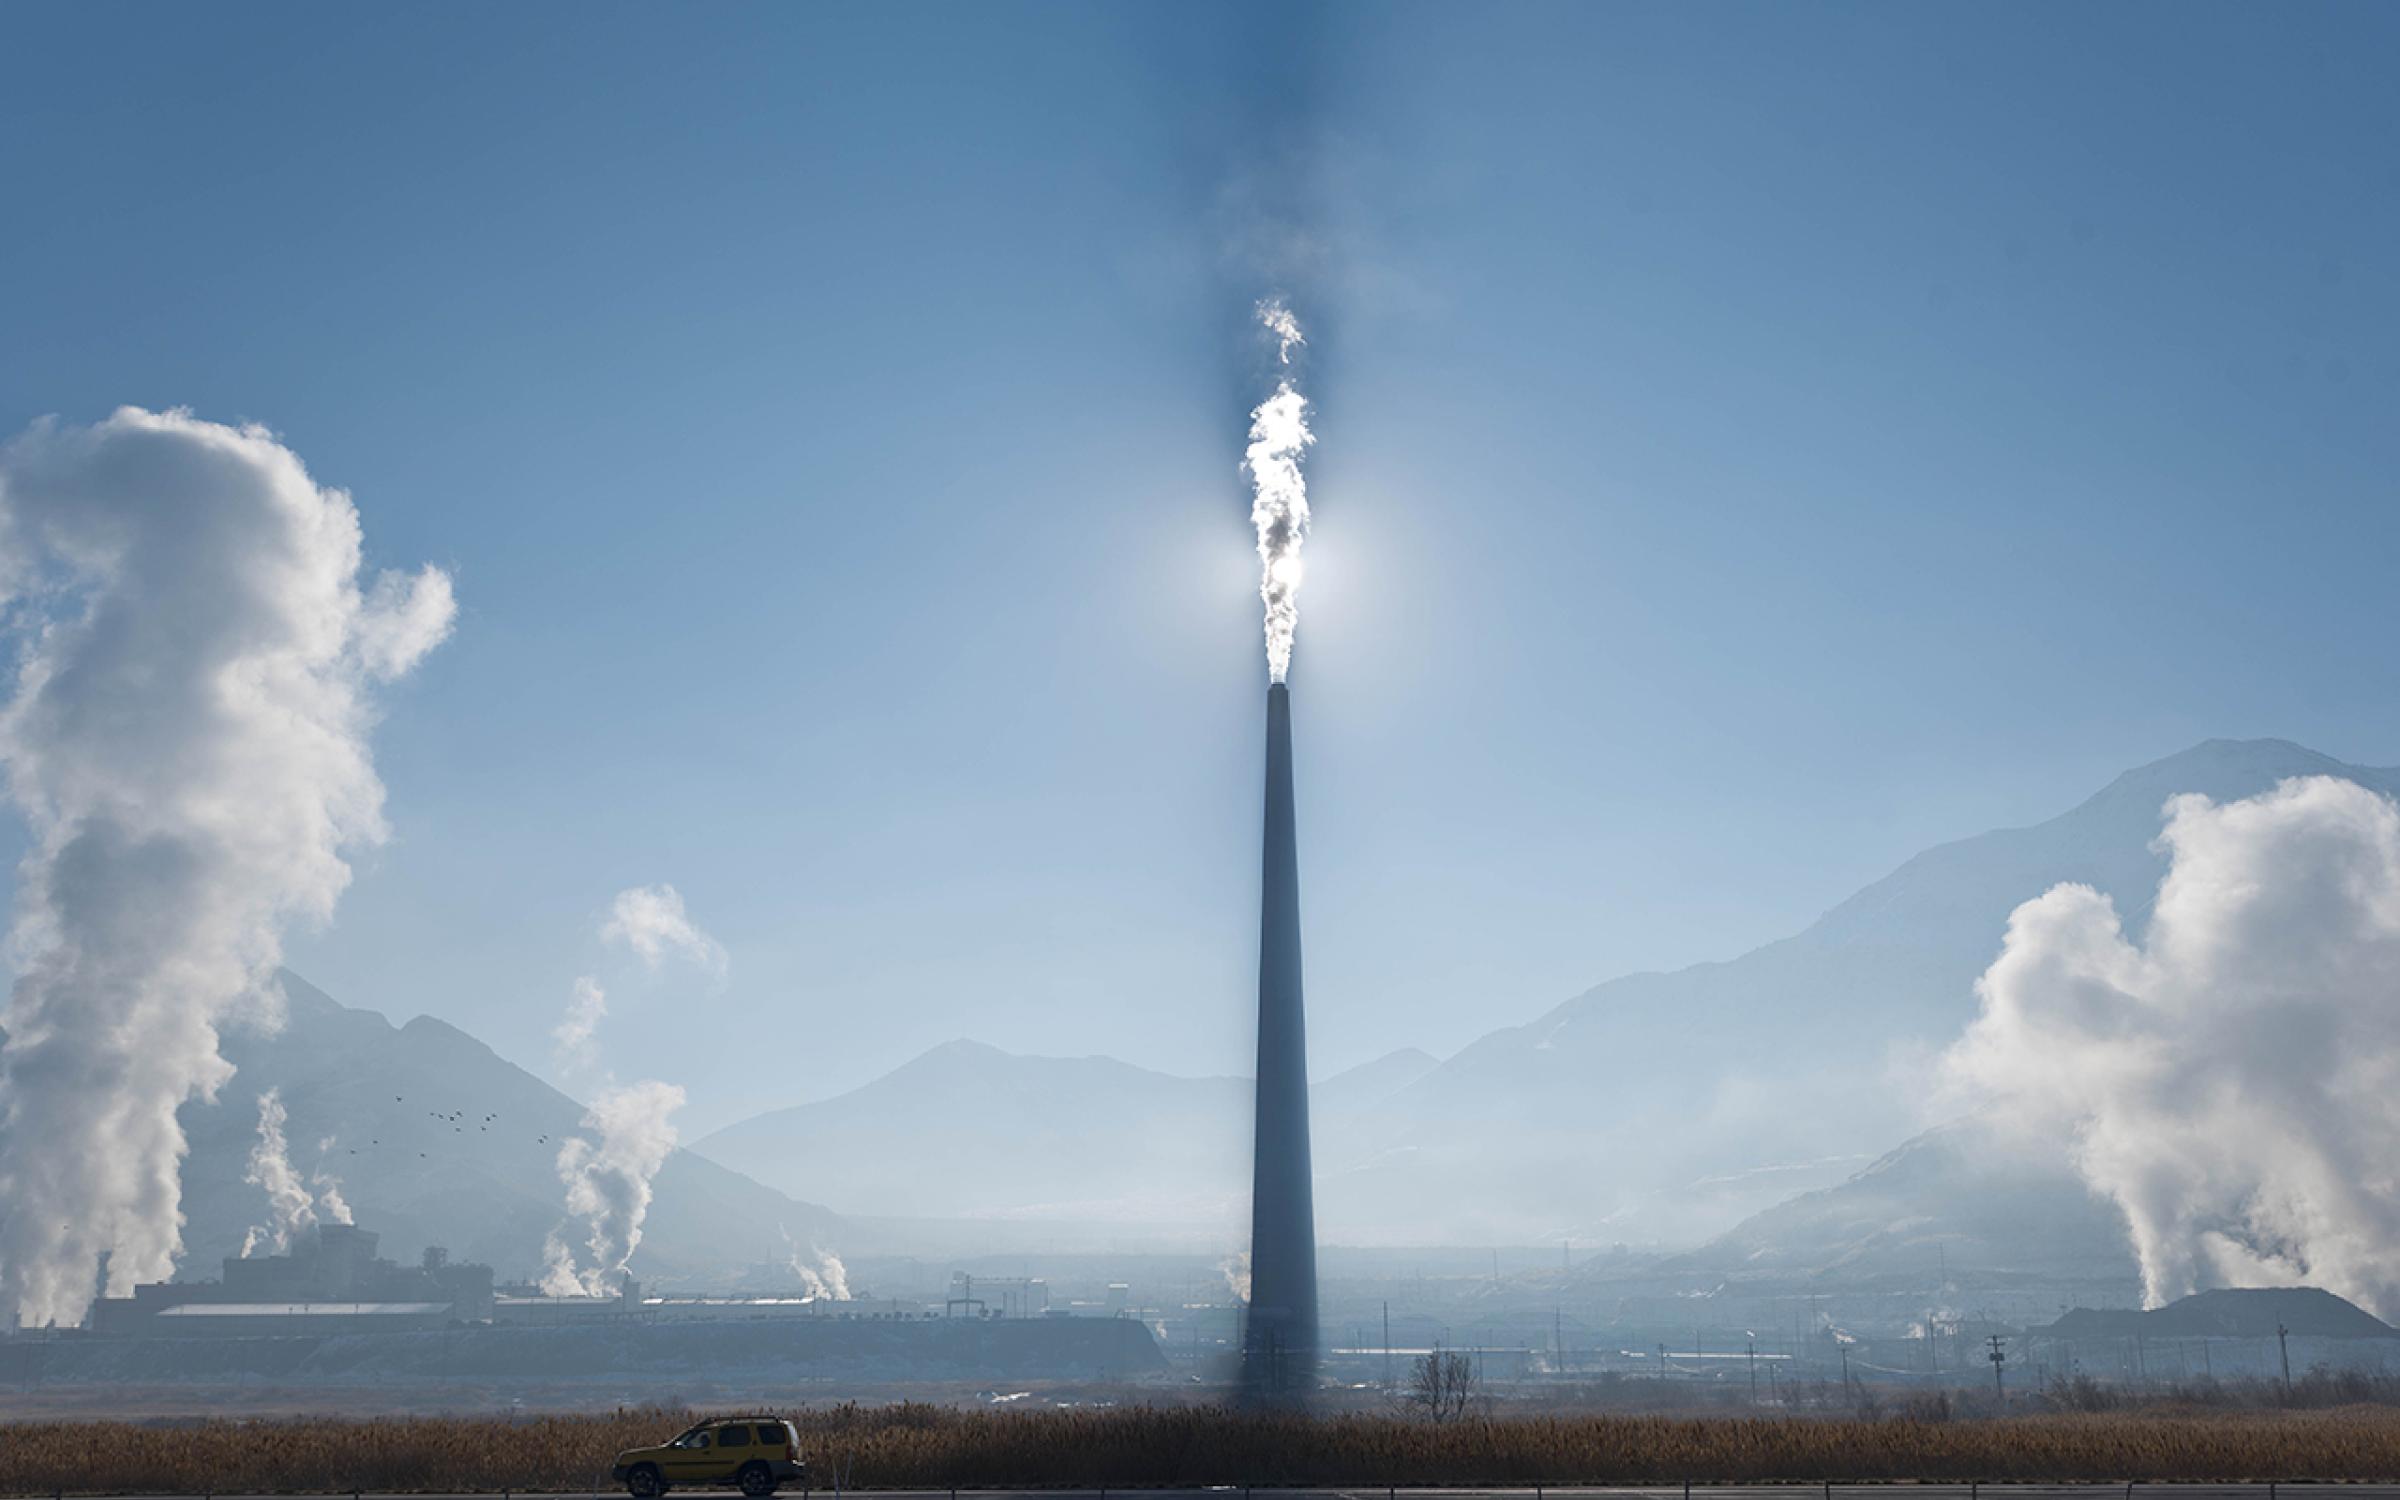 A large smelter with white smoke coming out of it in front of the sun in a blue sky.